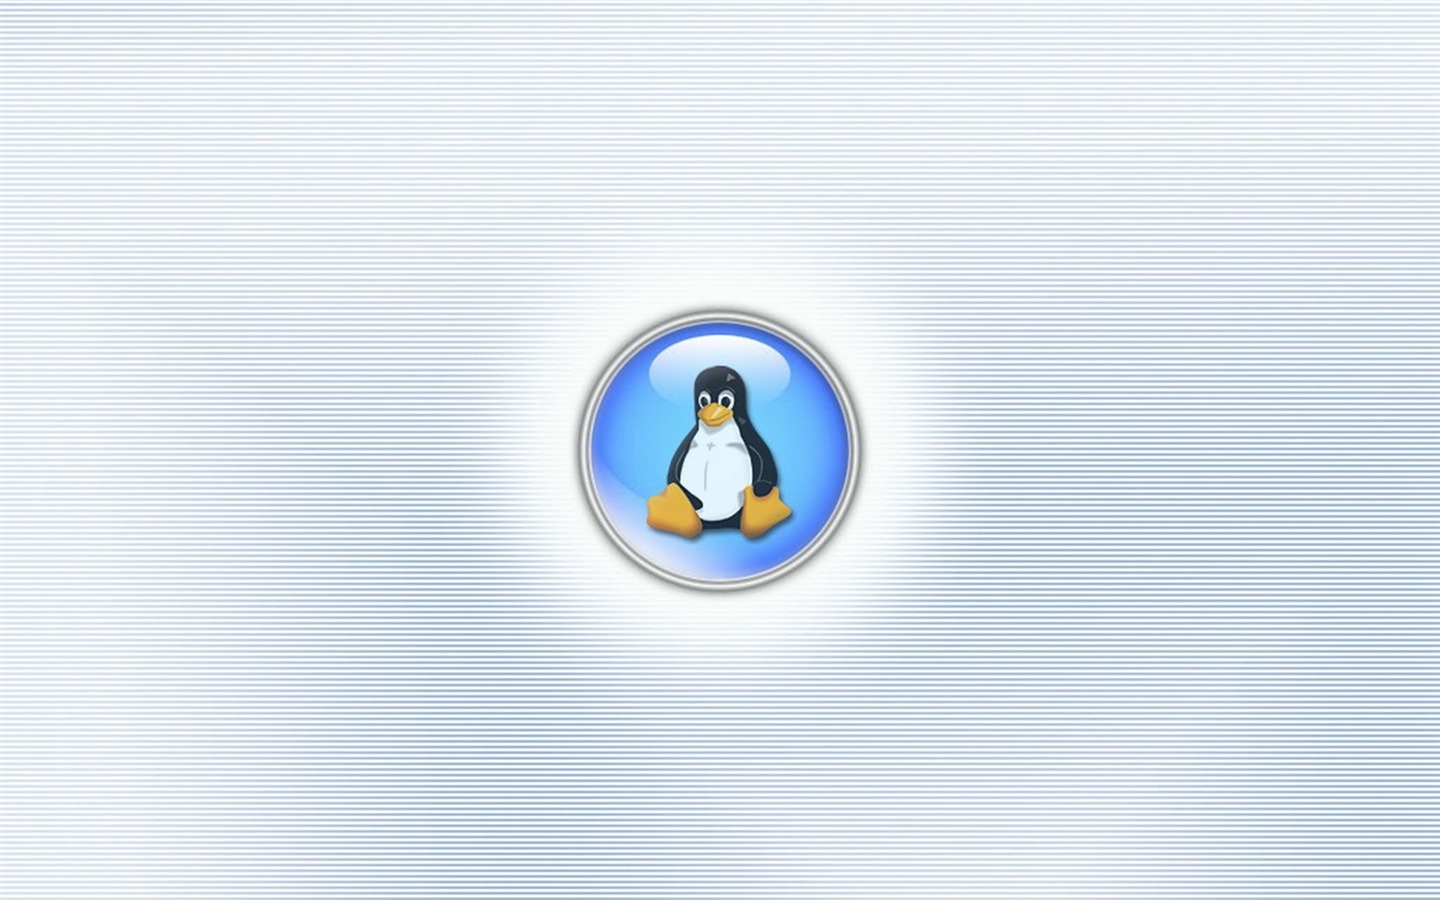 Linux tapety (1) #17 - 1440x900